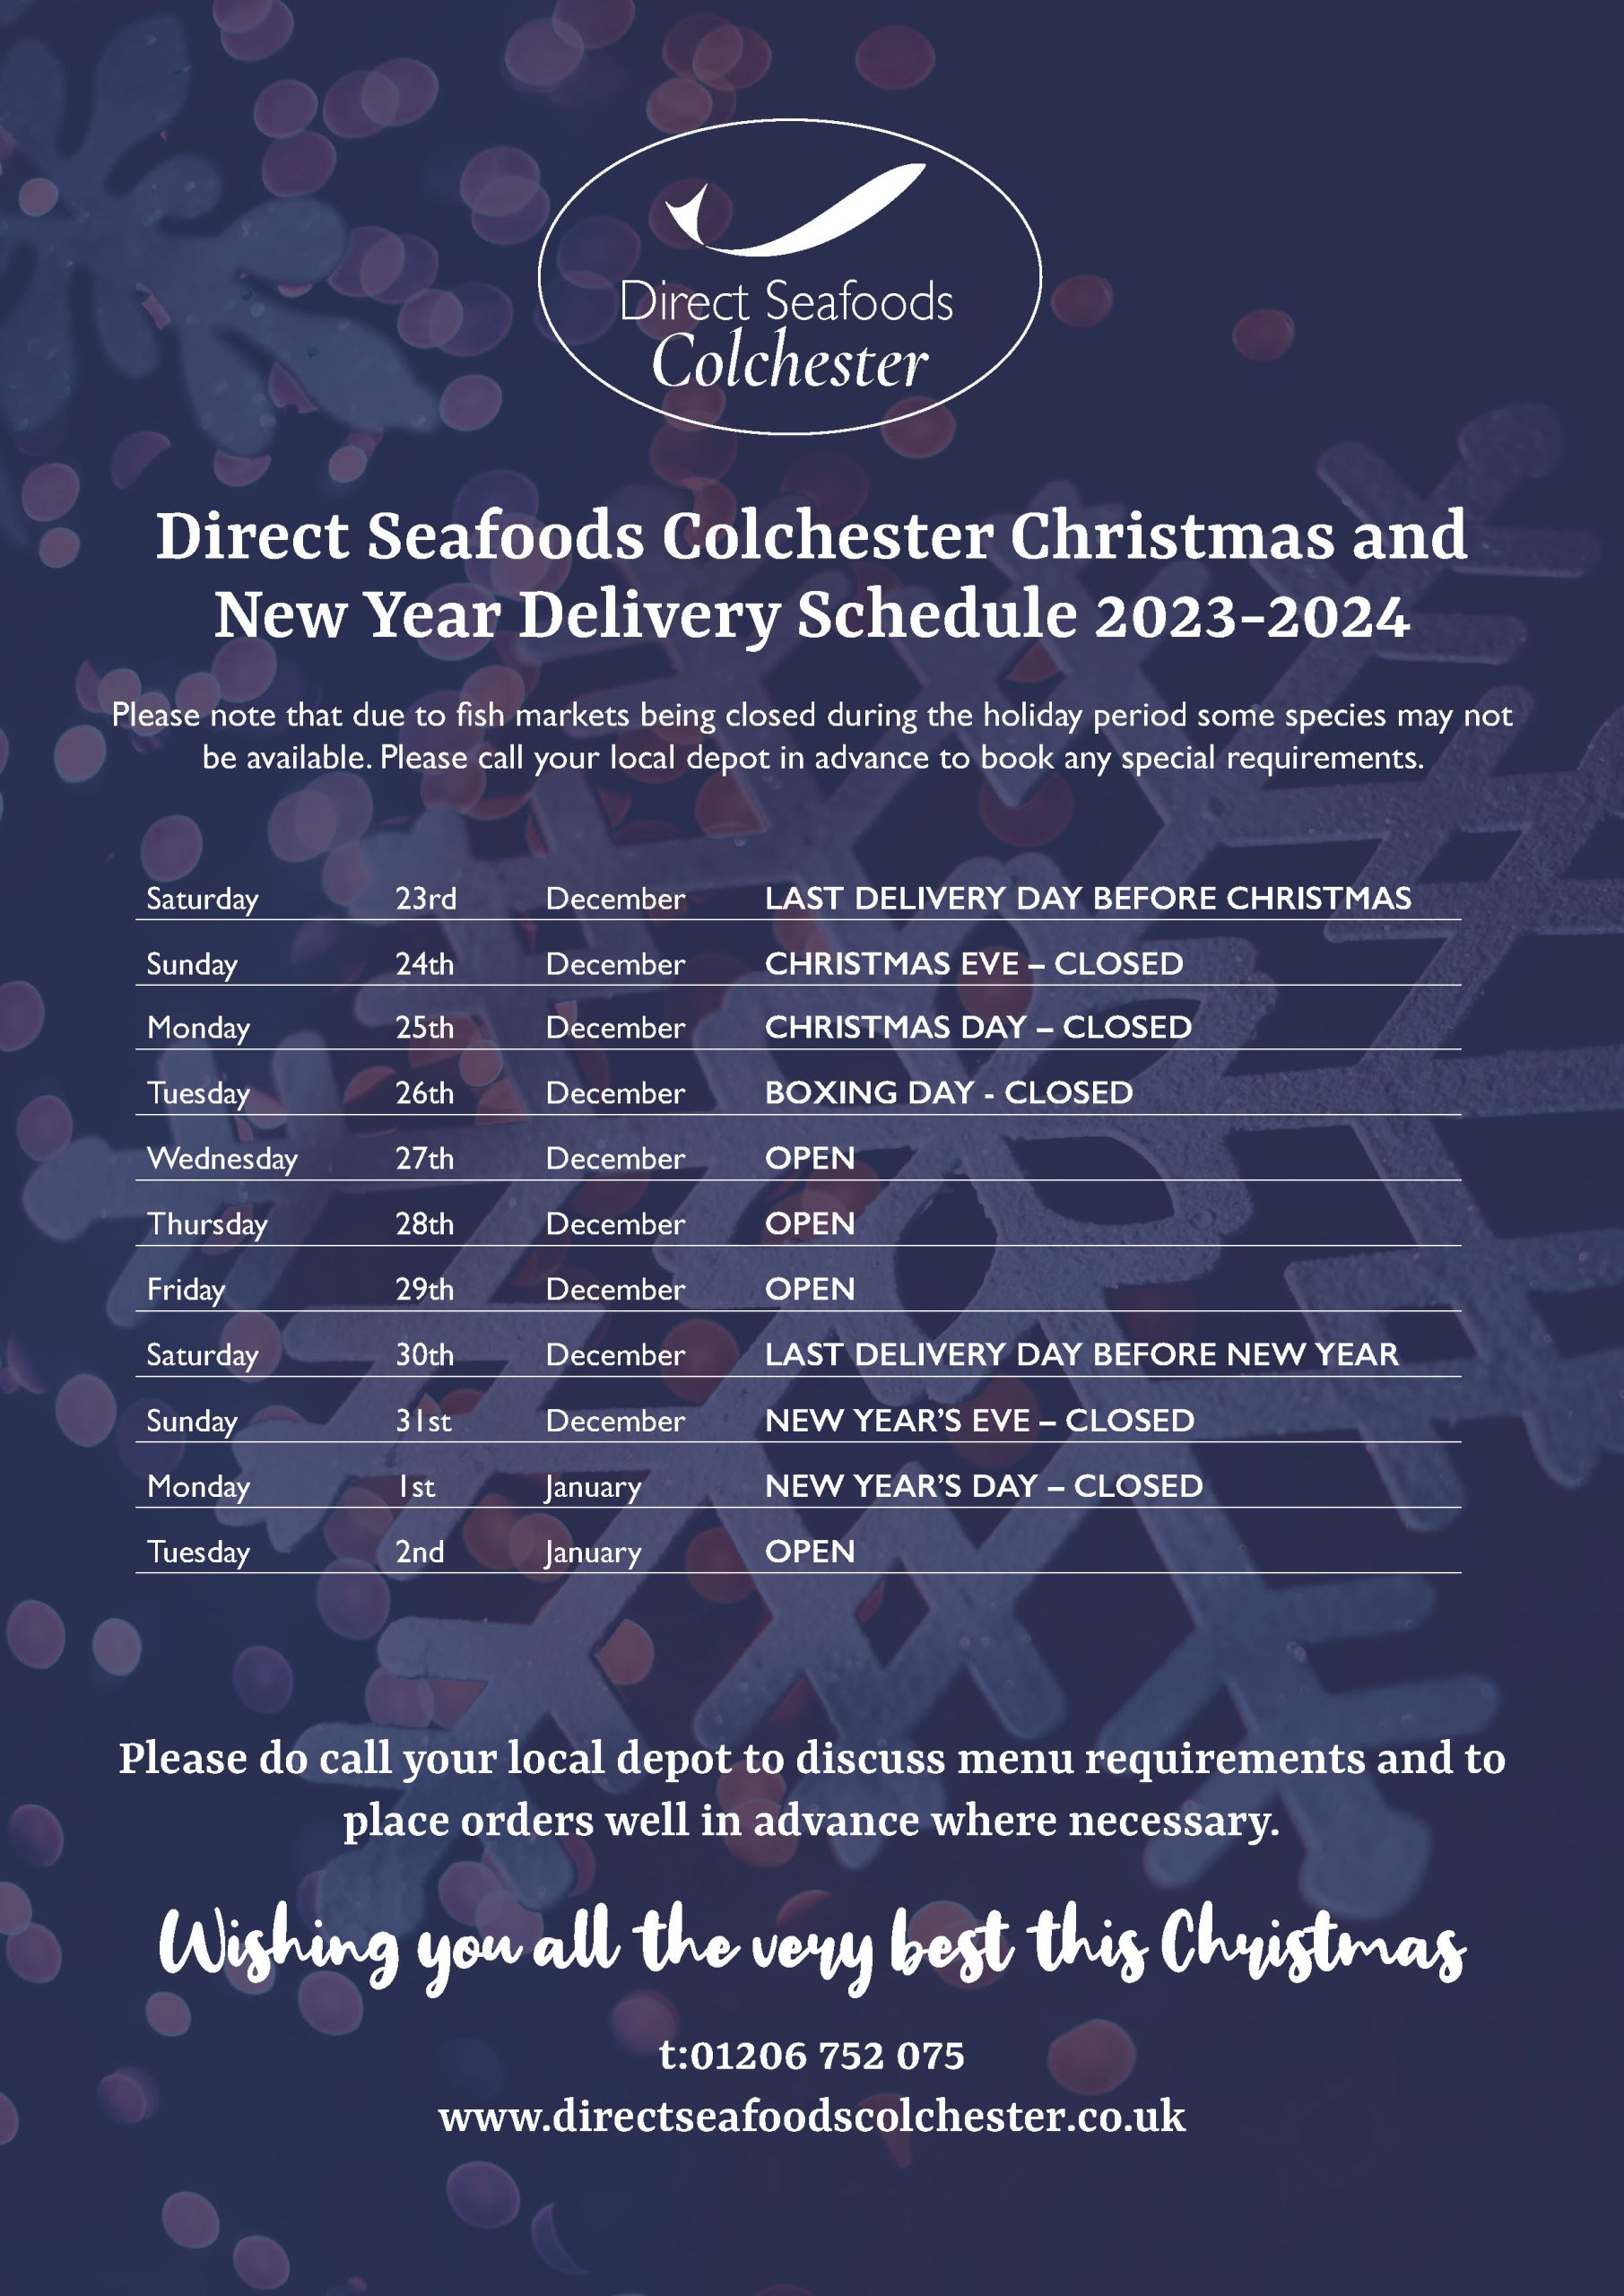 Christmas Schedule 2023 Direct Seafoods Colchester Graphic